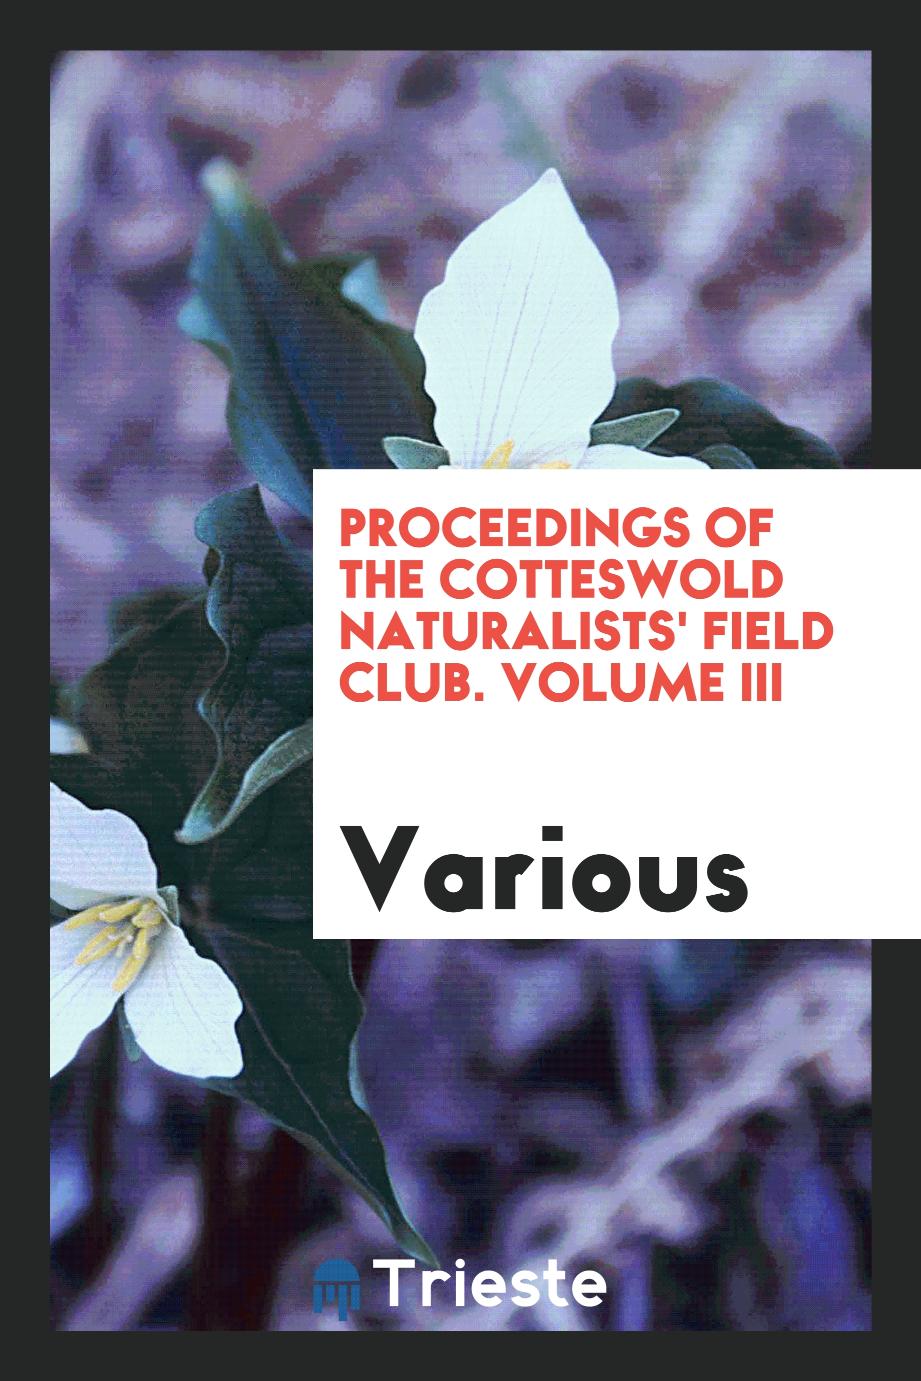 Proceedings of the Cotteswold Naturalists' Field Club. Volume III